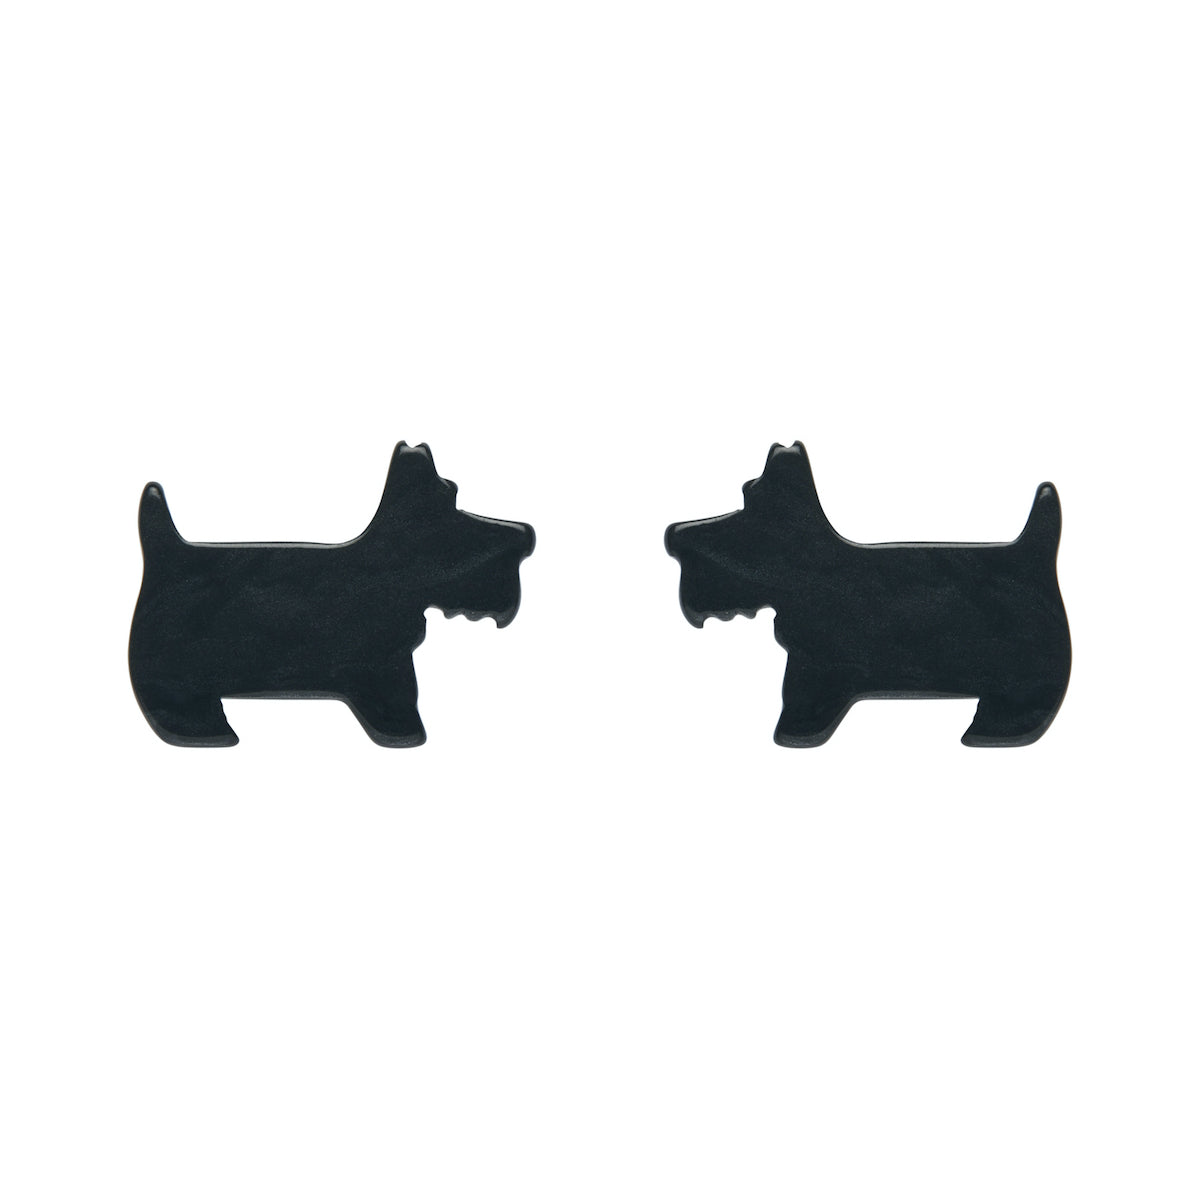 Essentials Collection Scottish terrier shaped post earrings in black ripple texture 100% Acrylic resin